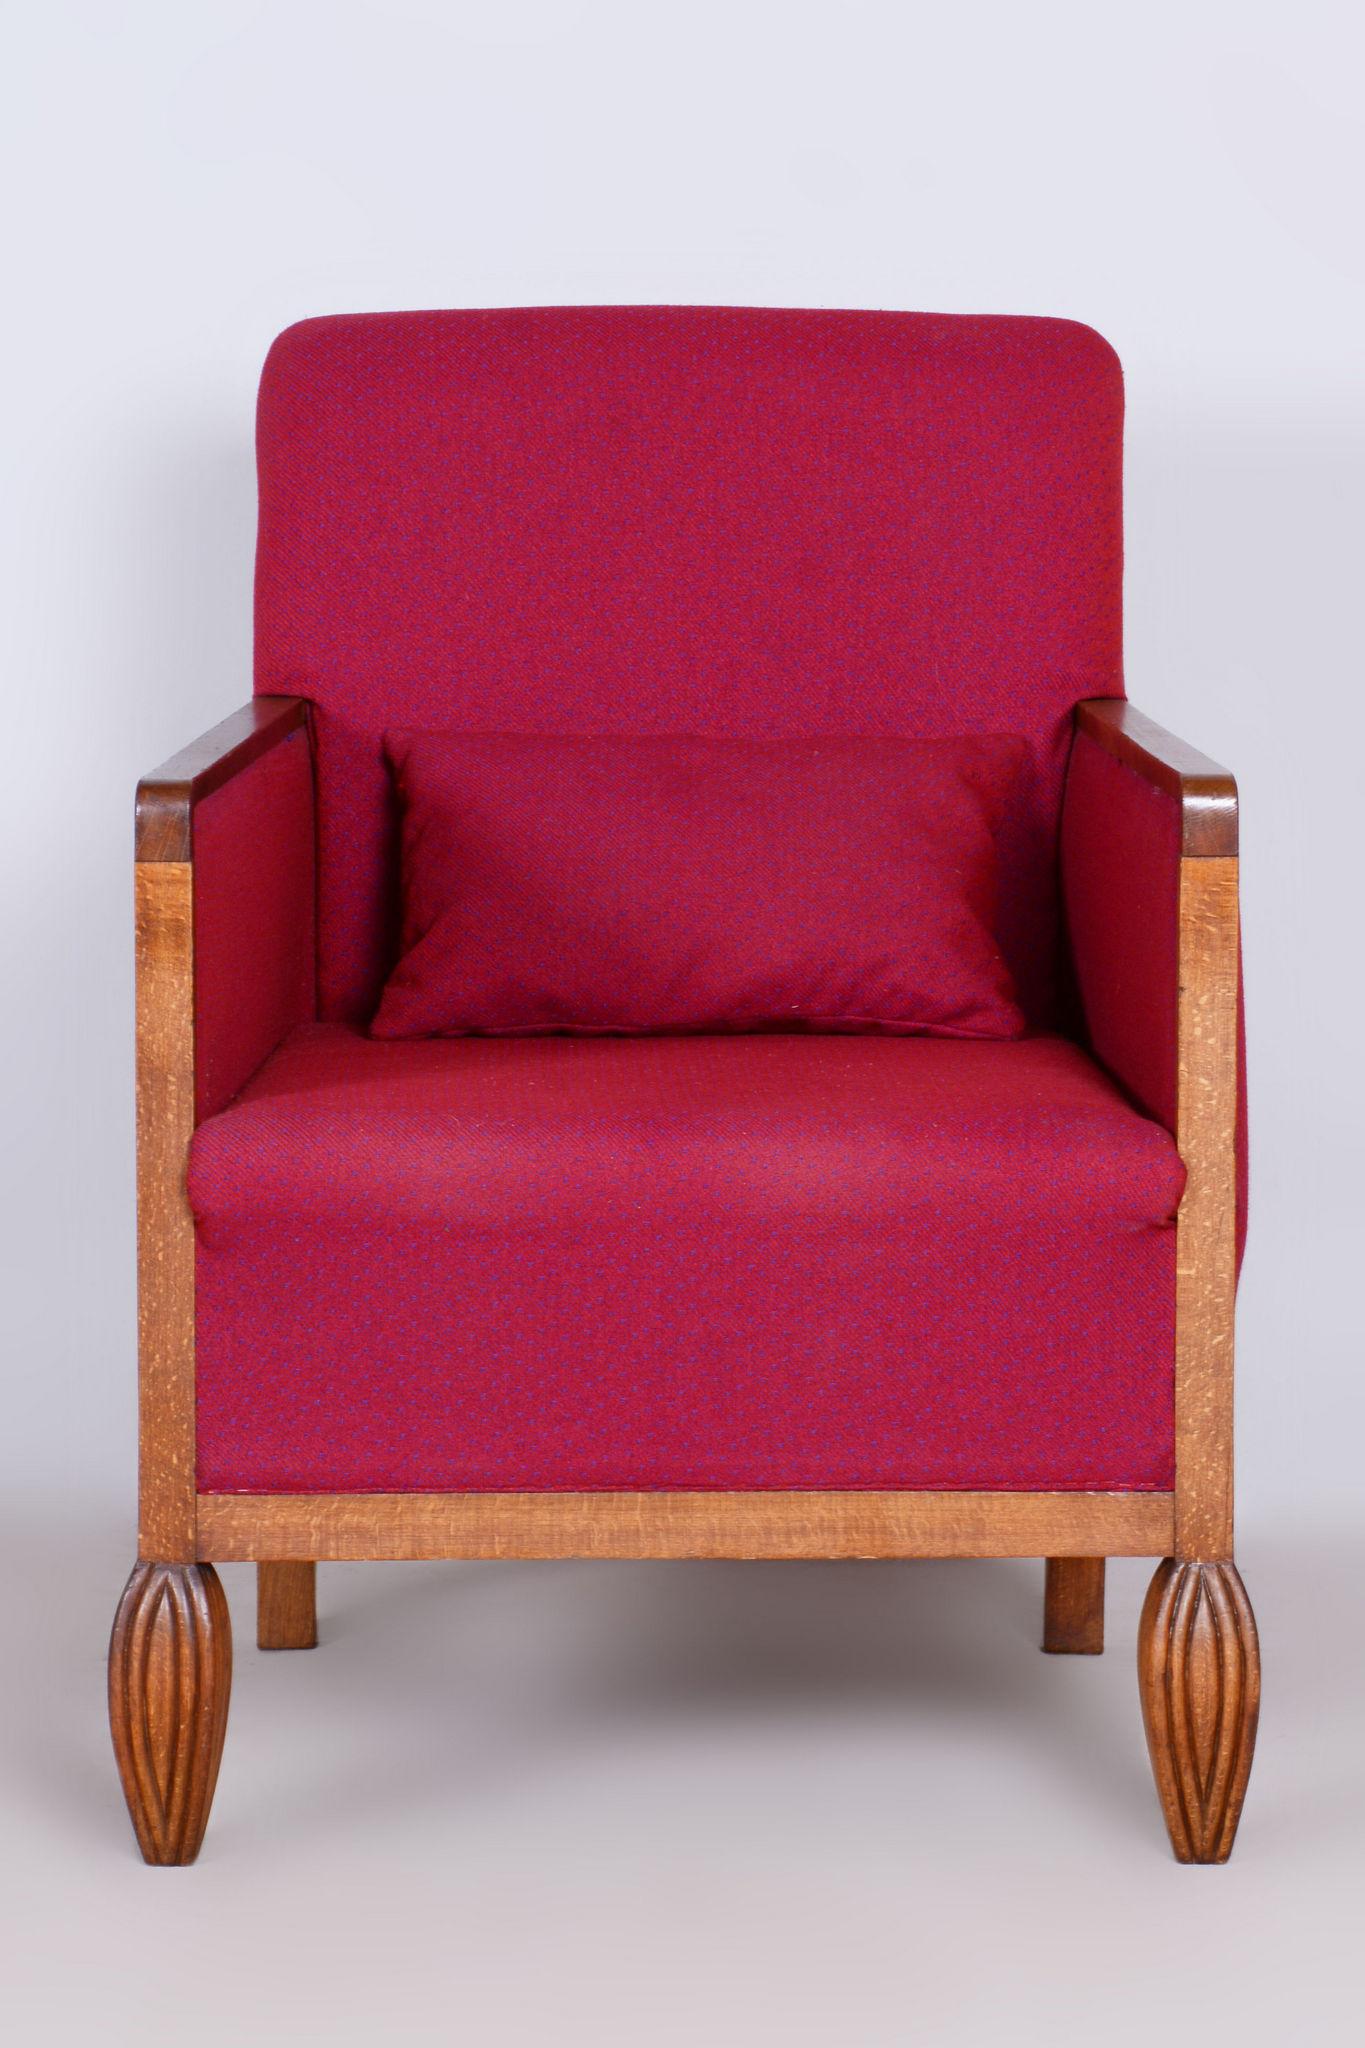 Mid-20th Century Restored Art Deco Red Armchair, Beech, Original Upholstery, France, 1930s For Sale